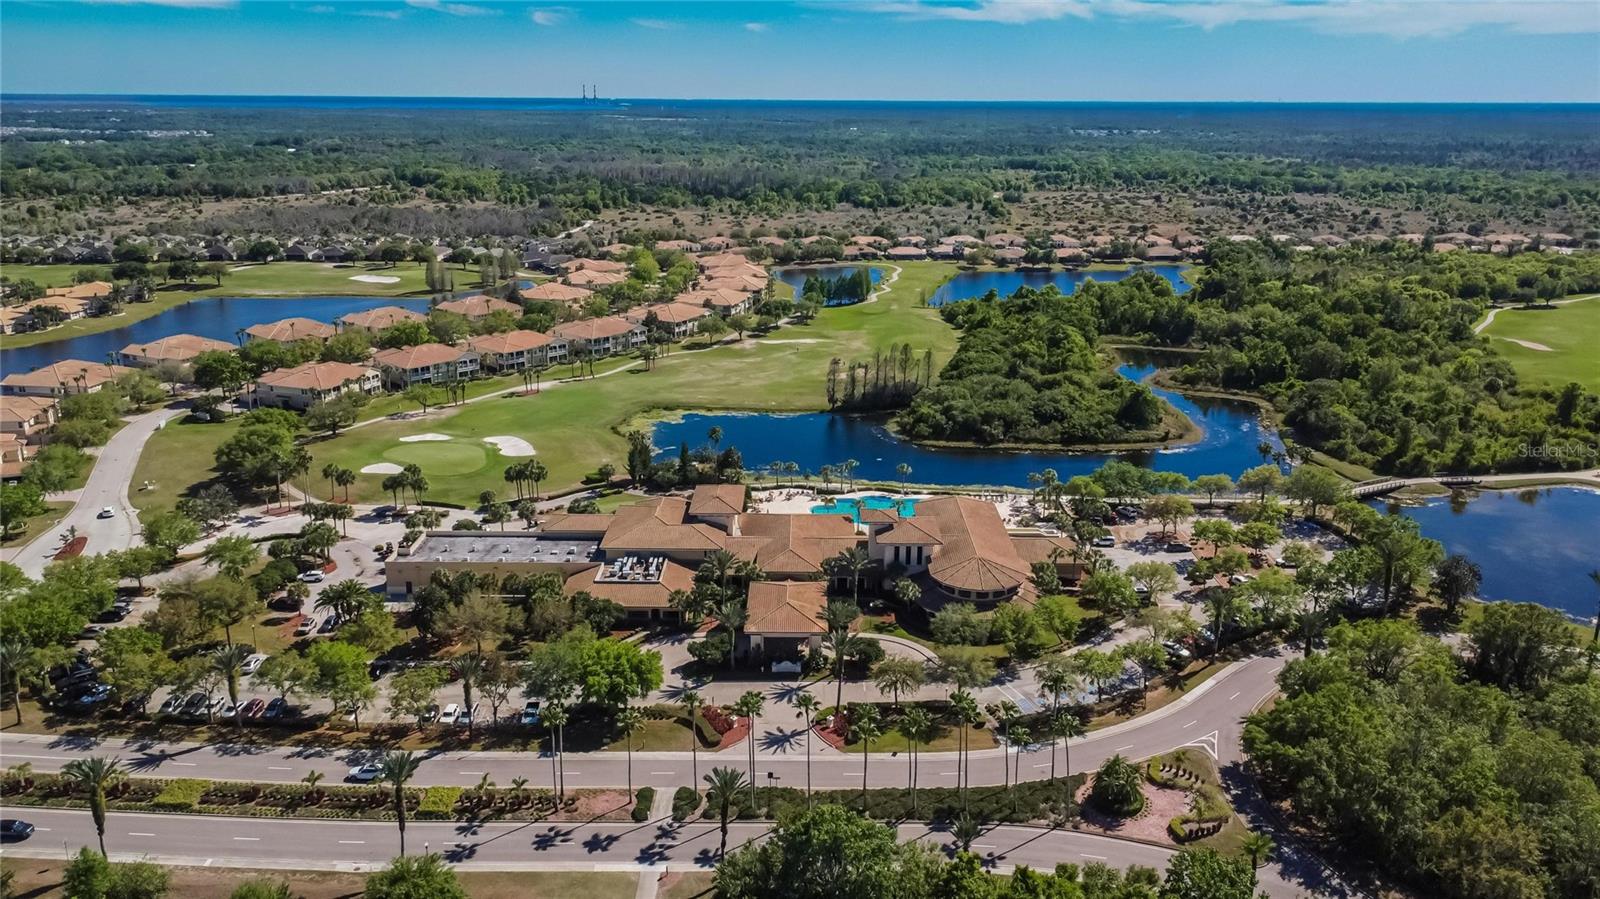 Palm lined drives, community clubhouse, Pool, restaurant, golf carts and abundant lakes offer a refined, fun lifestyle.